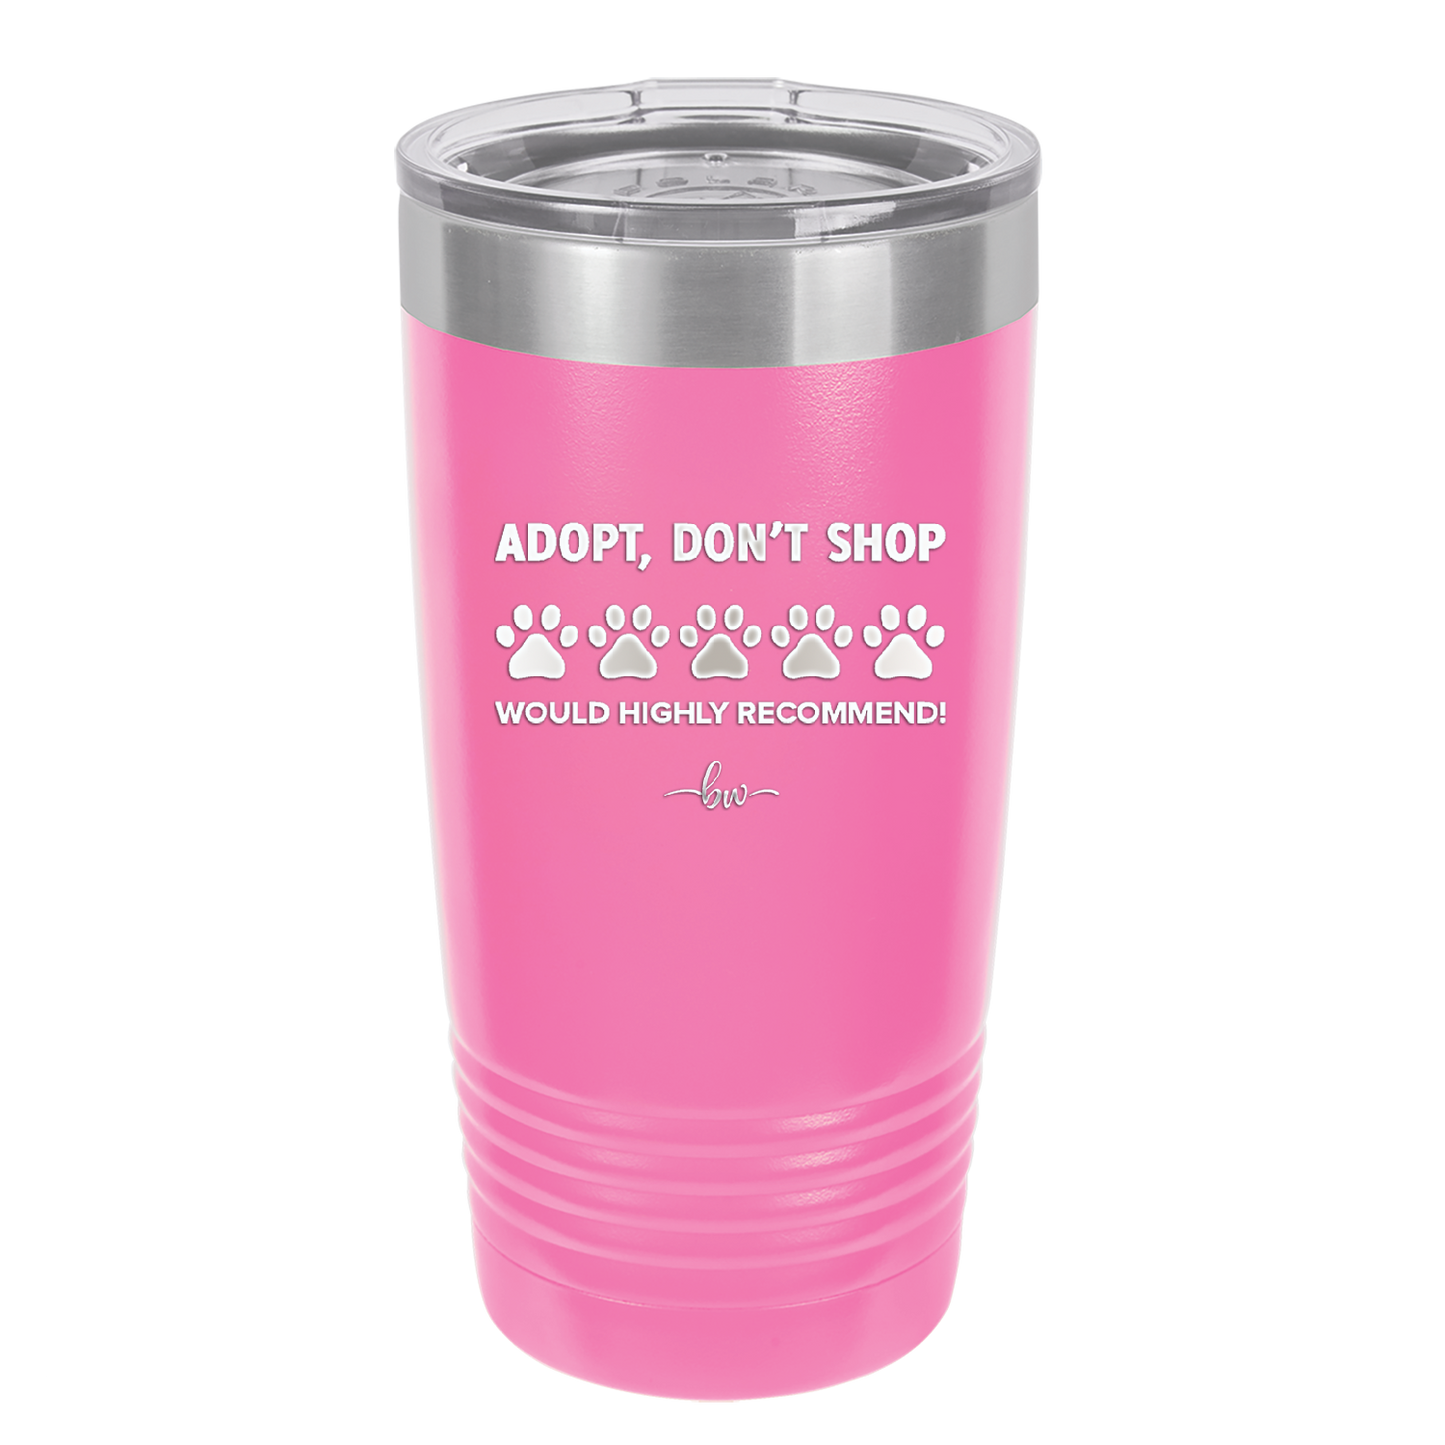 Adopt. 5 Paws. Would Highly Recommend - Laser Engraved Stainless Steel Drinkware - 1538 -